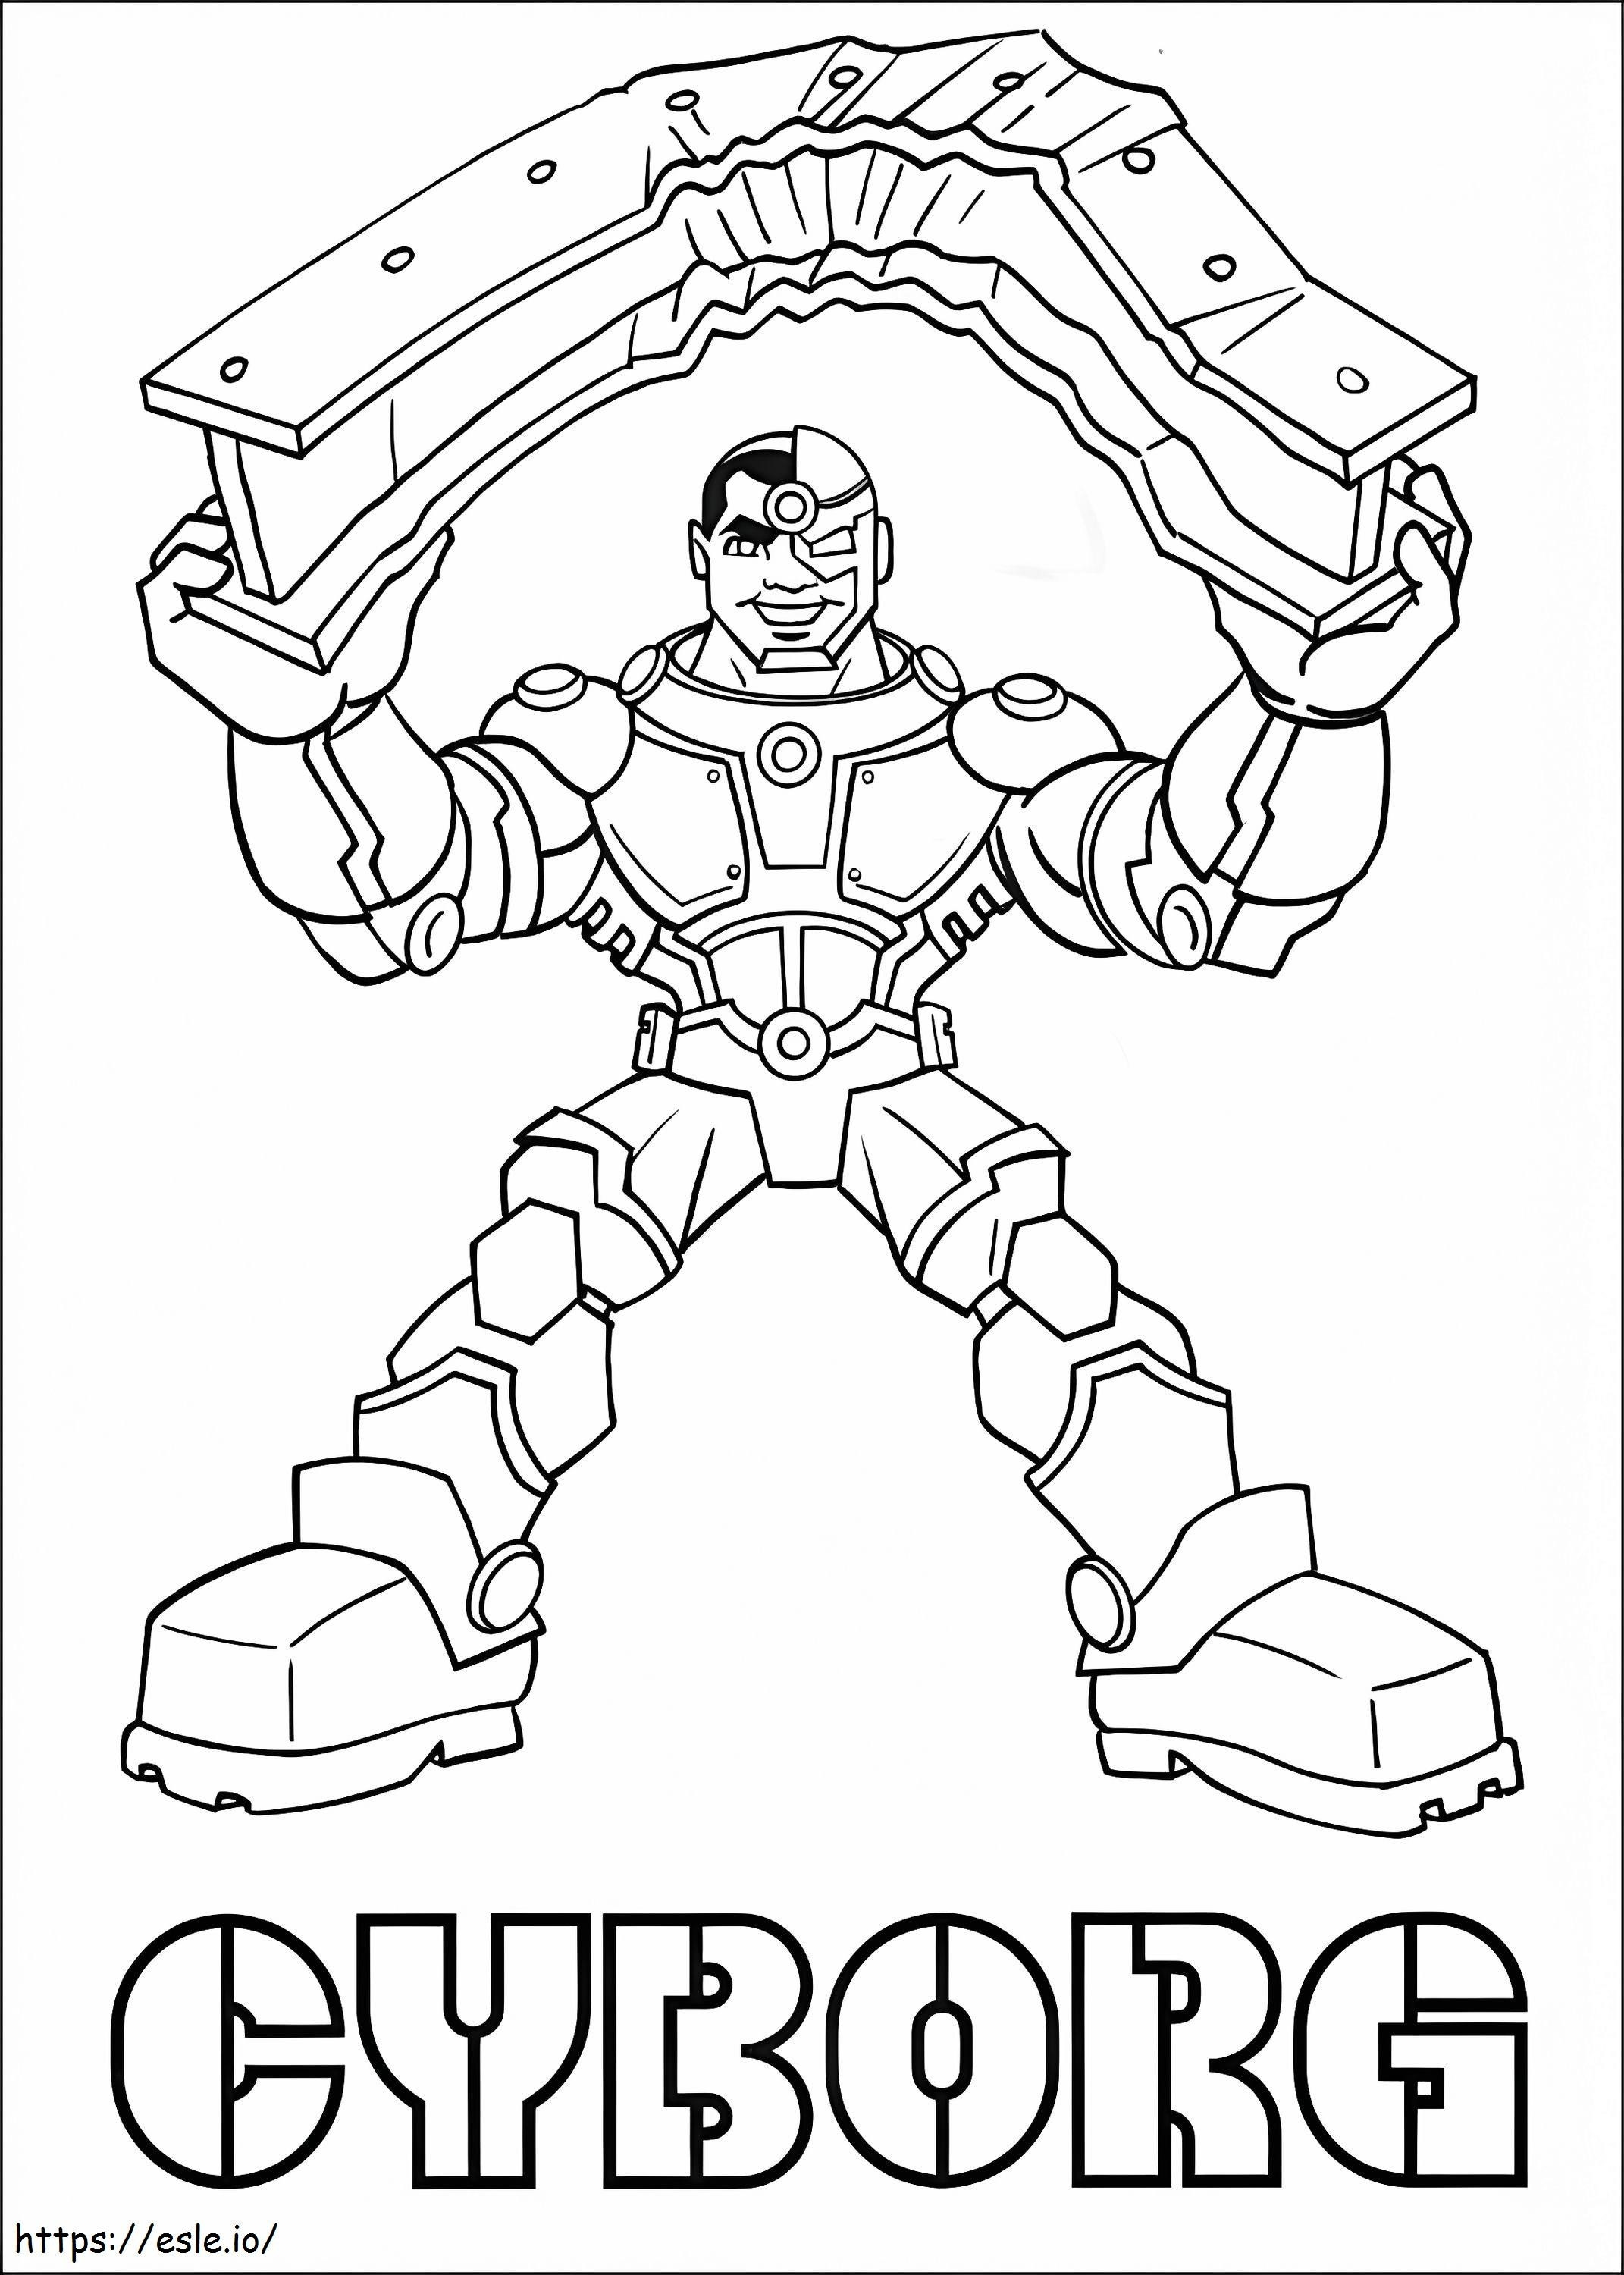 Cyborg From Super Friends coloring page